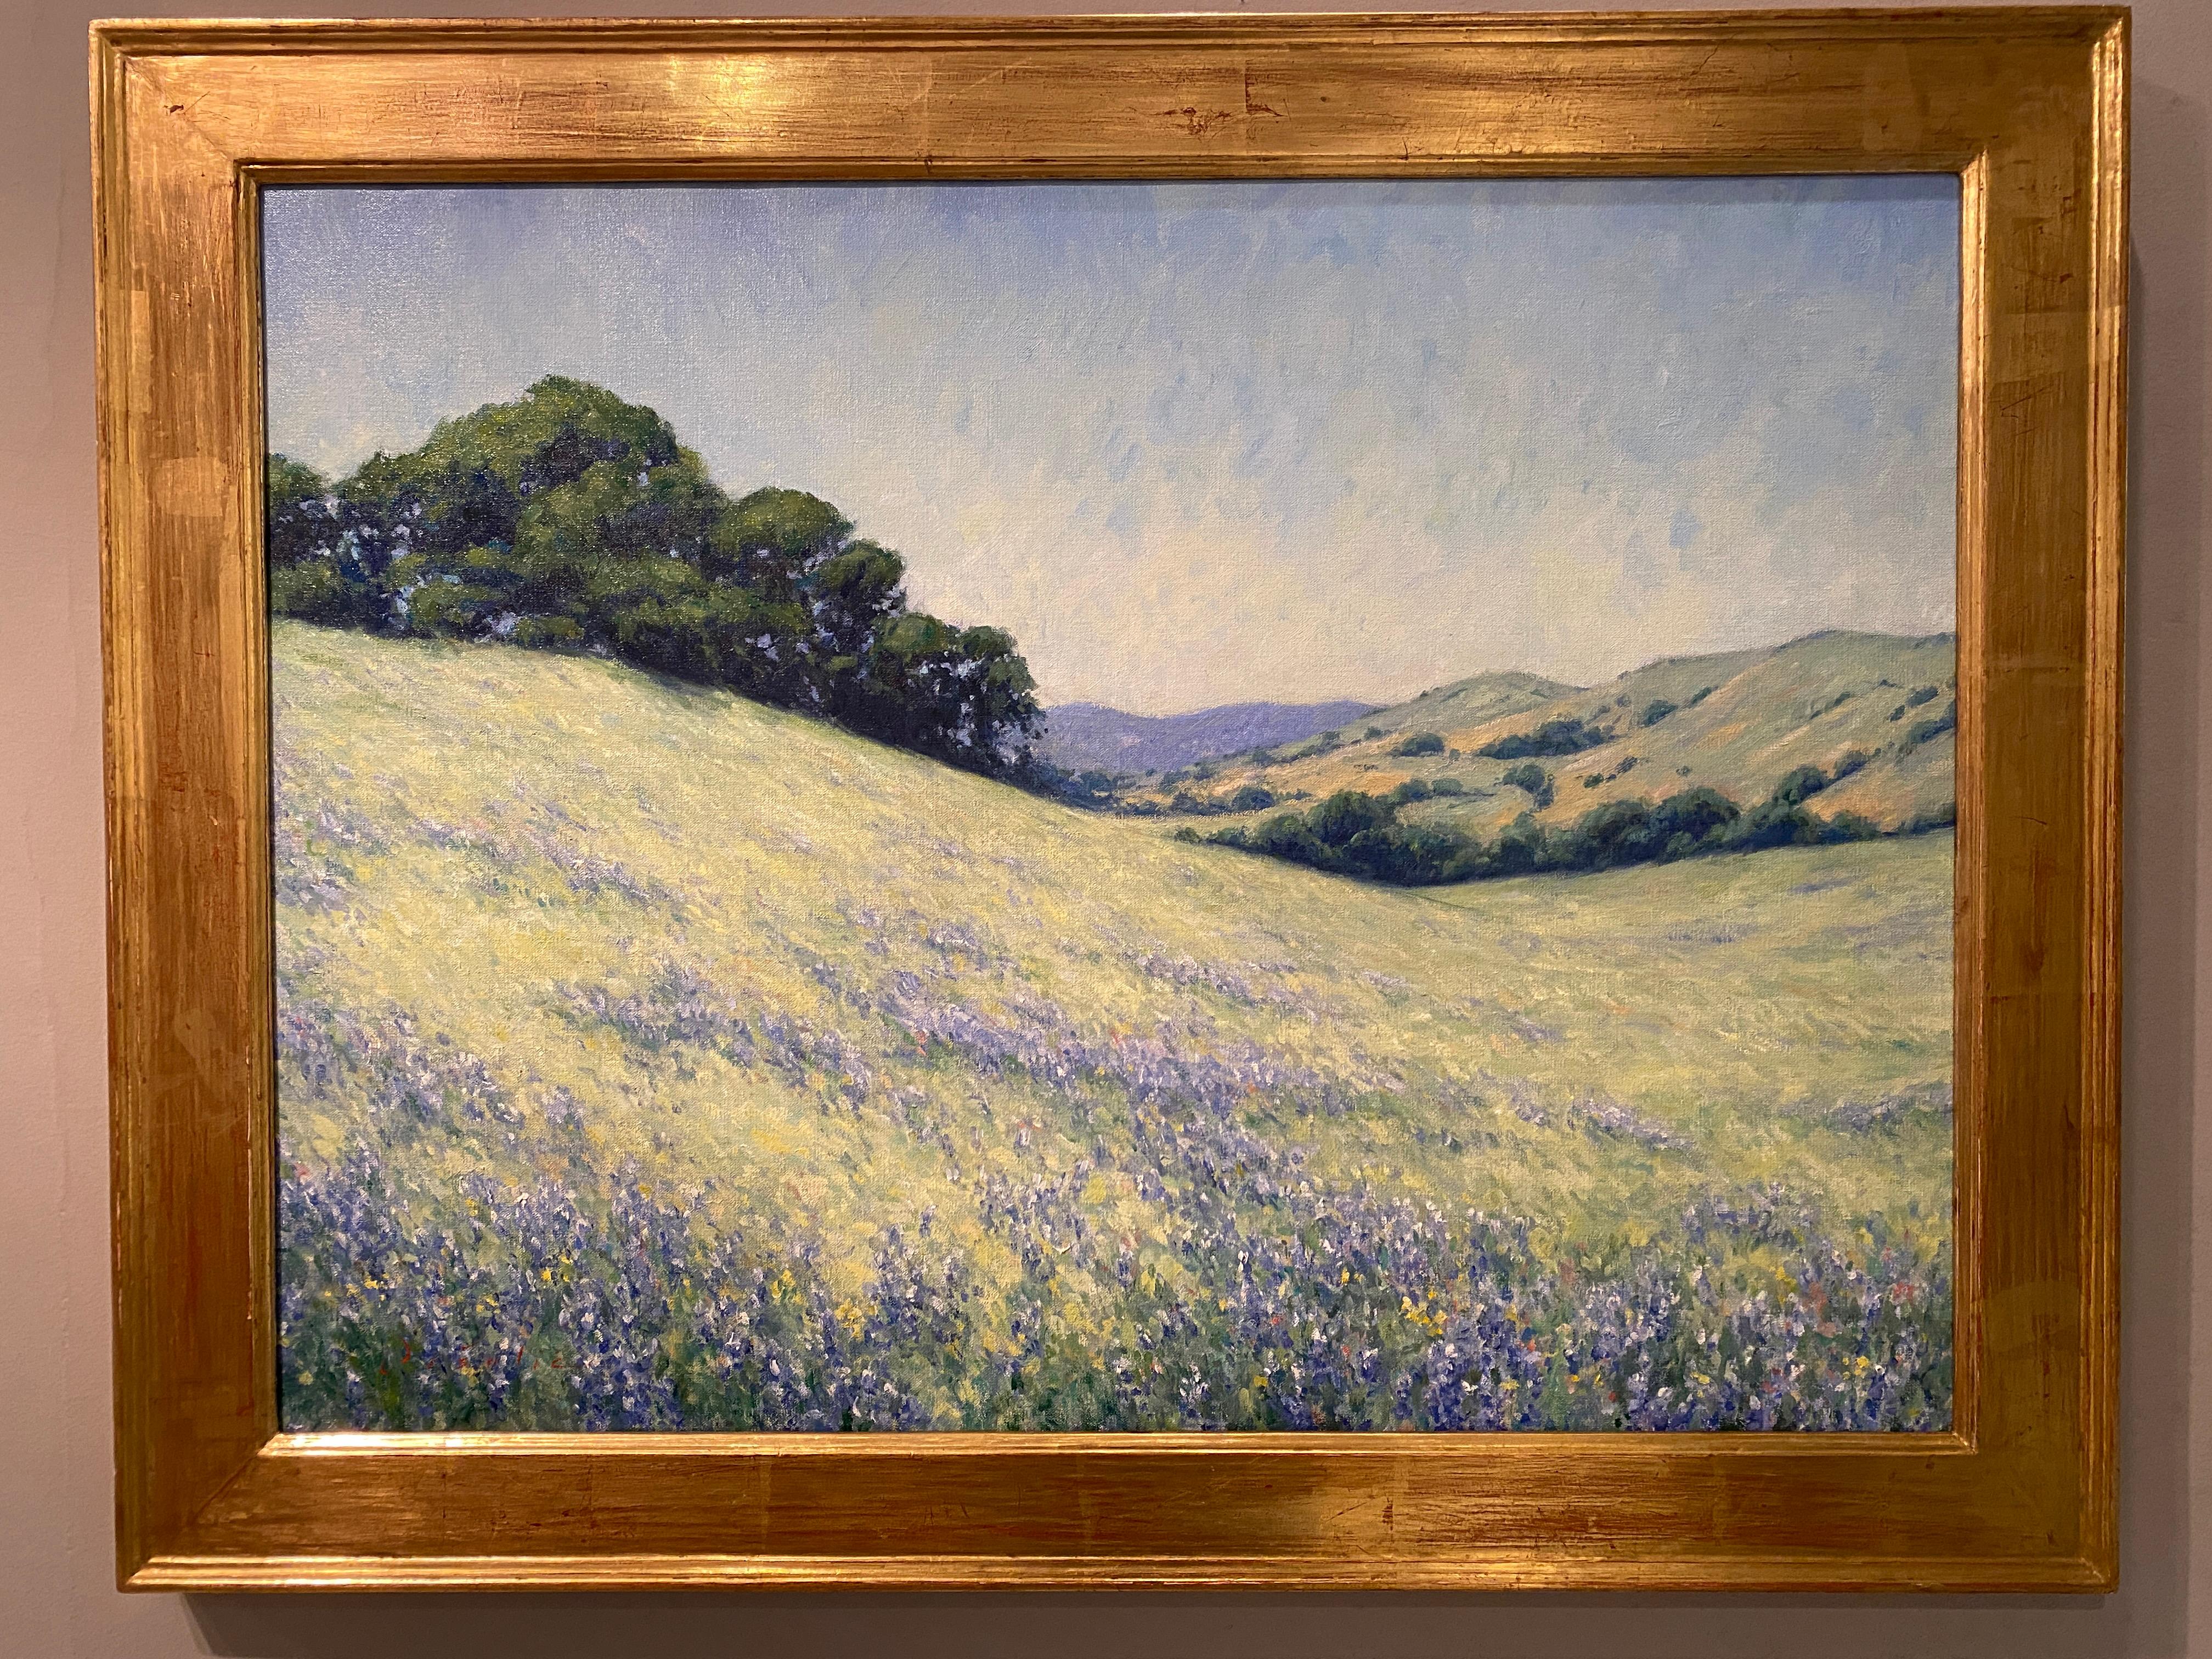 Lupine Fields, Toro Park  - Painting by Tina Orsolic Dalessio